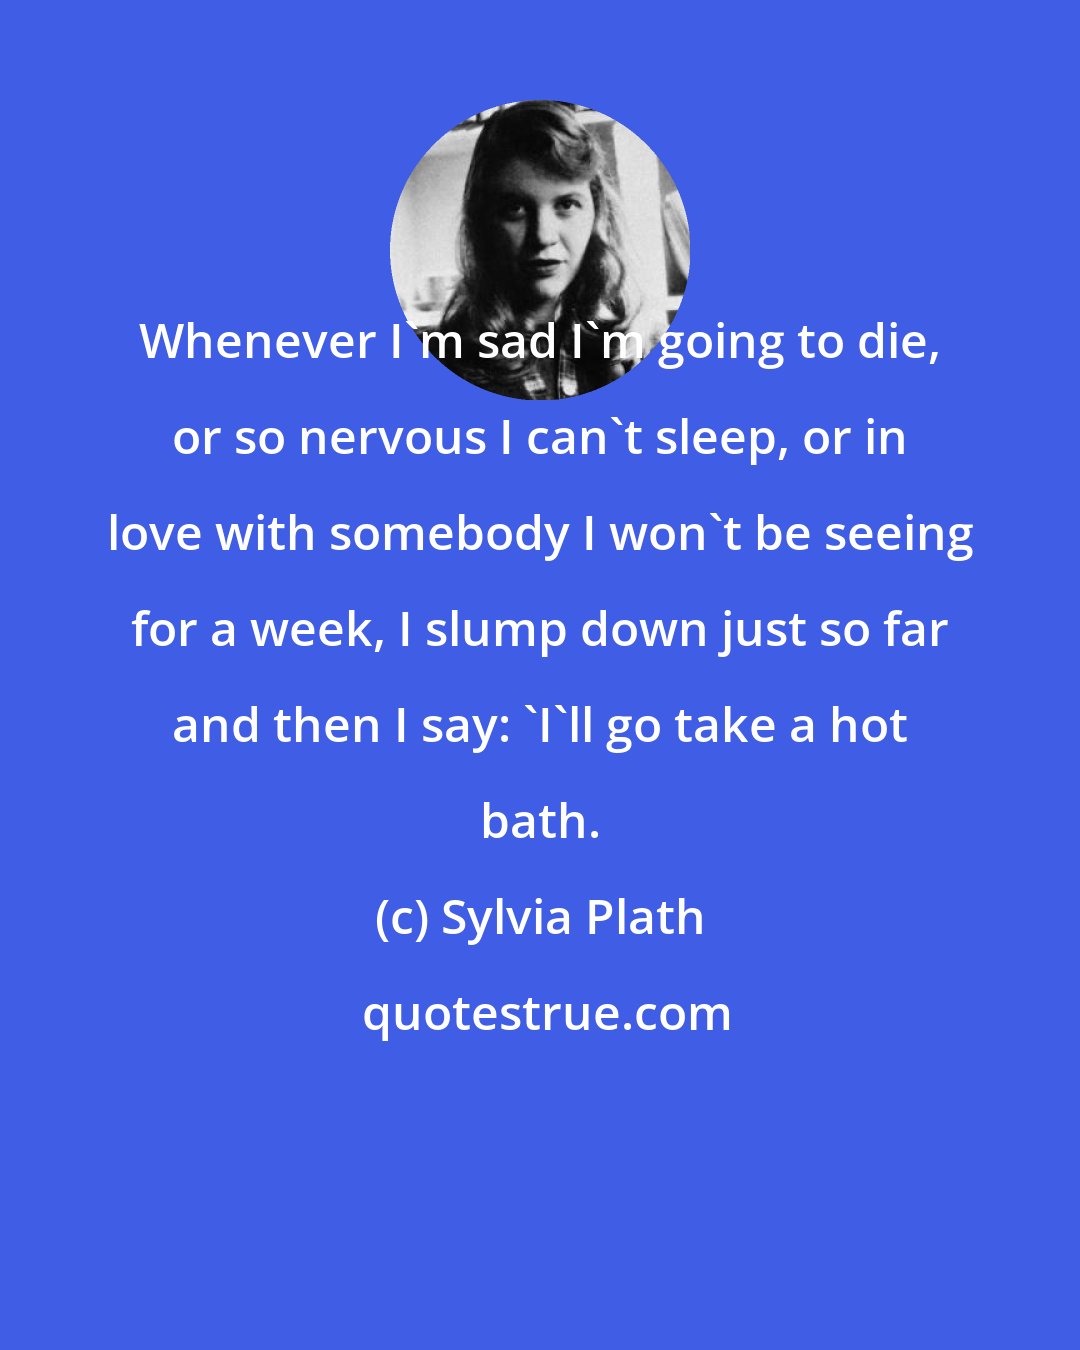 Sylvia Plath: Whenever I'm sad I'm going to die, or so nervous I can't sleep, or in love with somebody I won't be seeing for a week, I slump down just so far and then I say: 'I'll go take a hot bath.